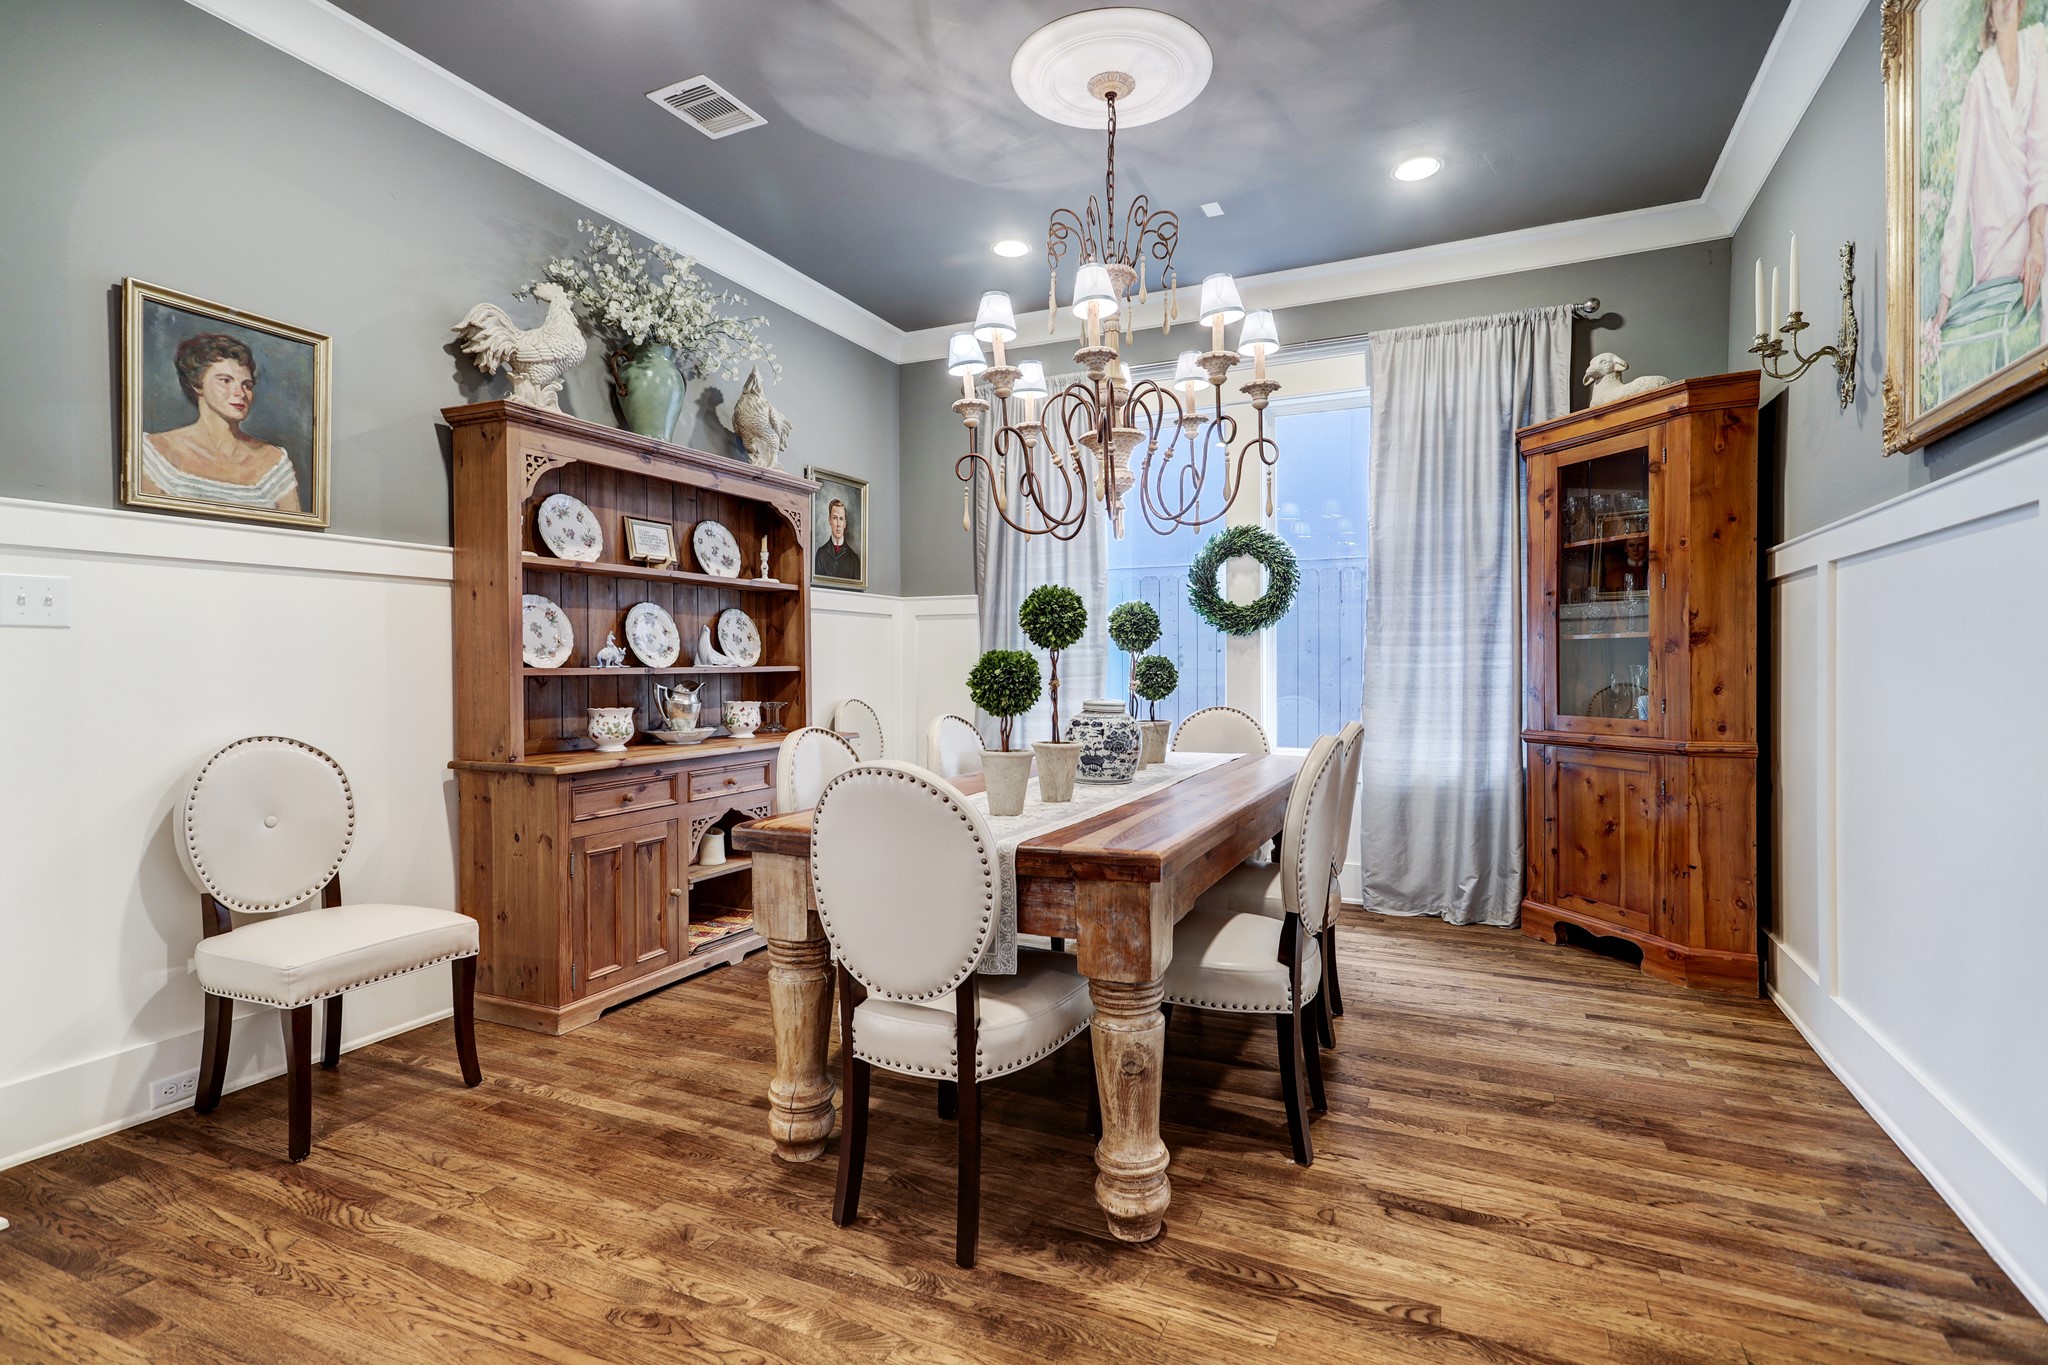 This spacious formal dining room features wainscoted walls, high ceilings, and large windows that bring an abundance of natural light into the space.